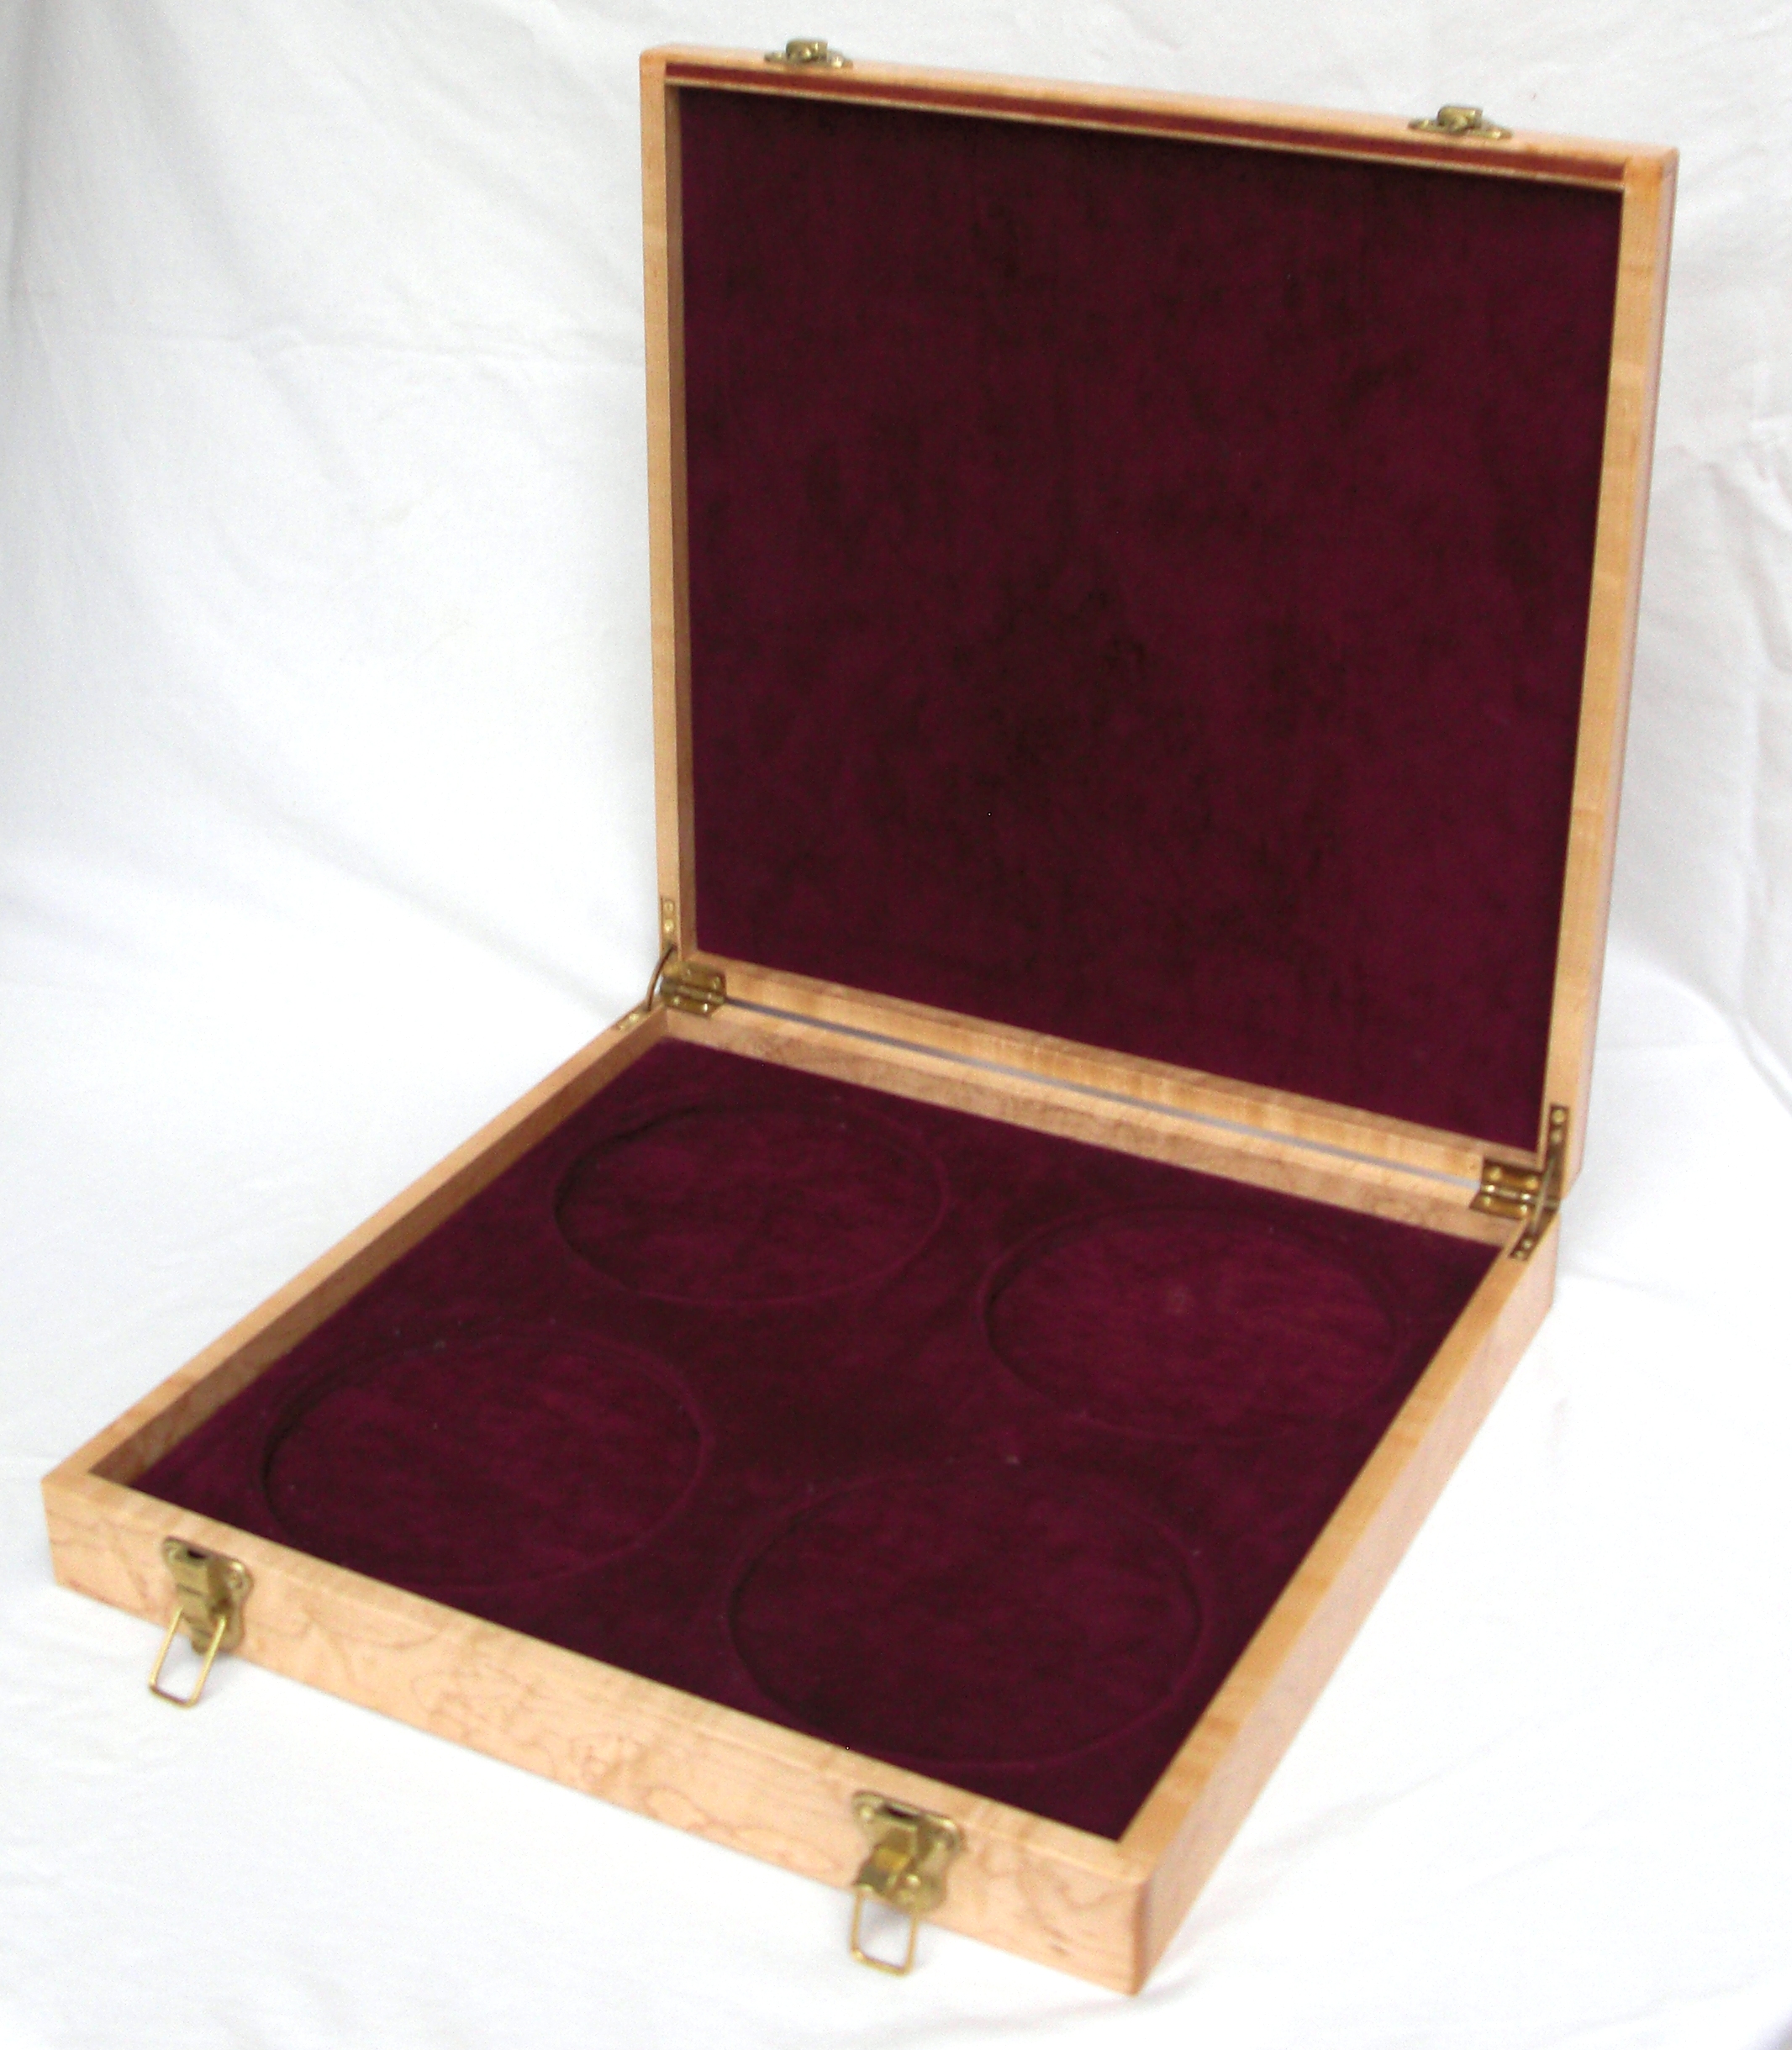 Storage Box 1195 - Click for details